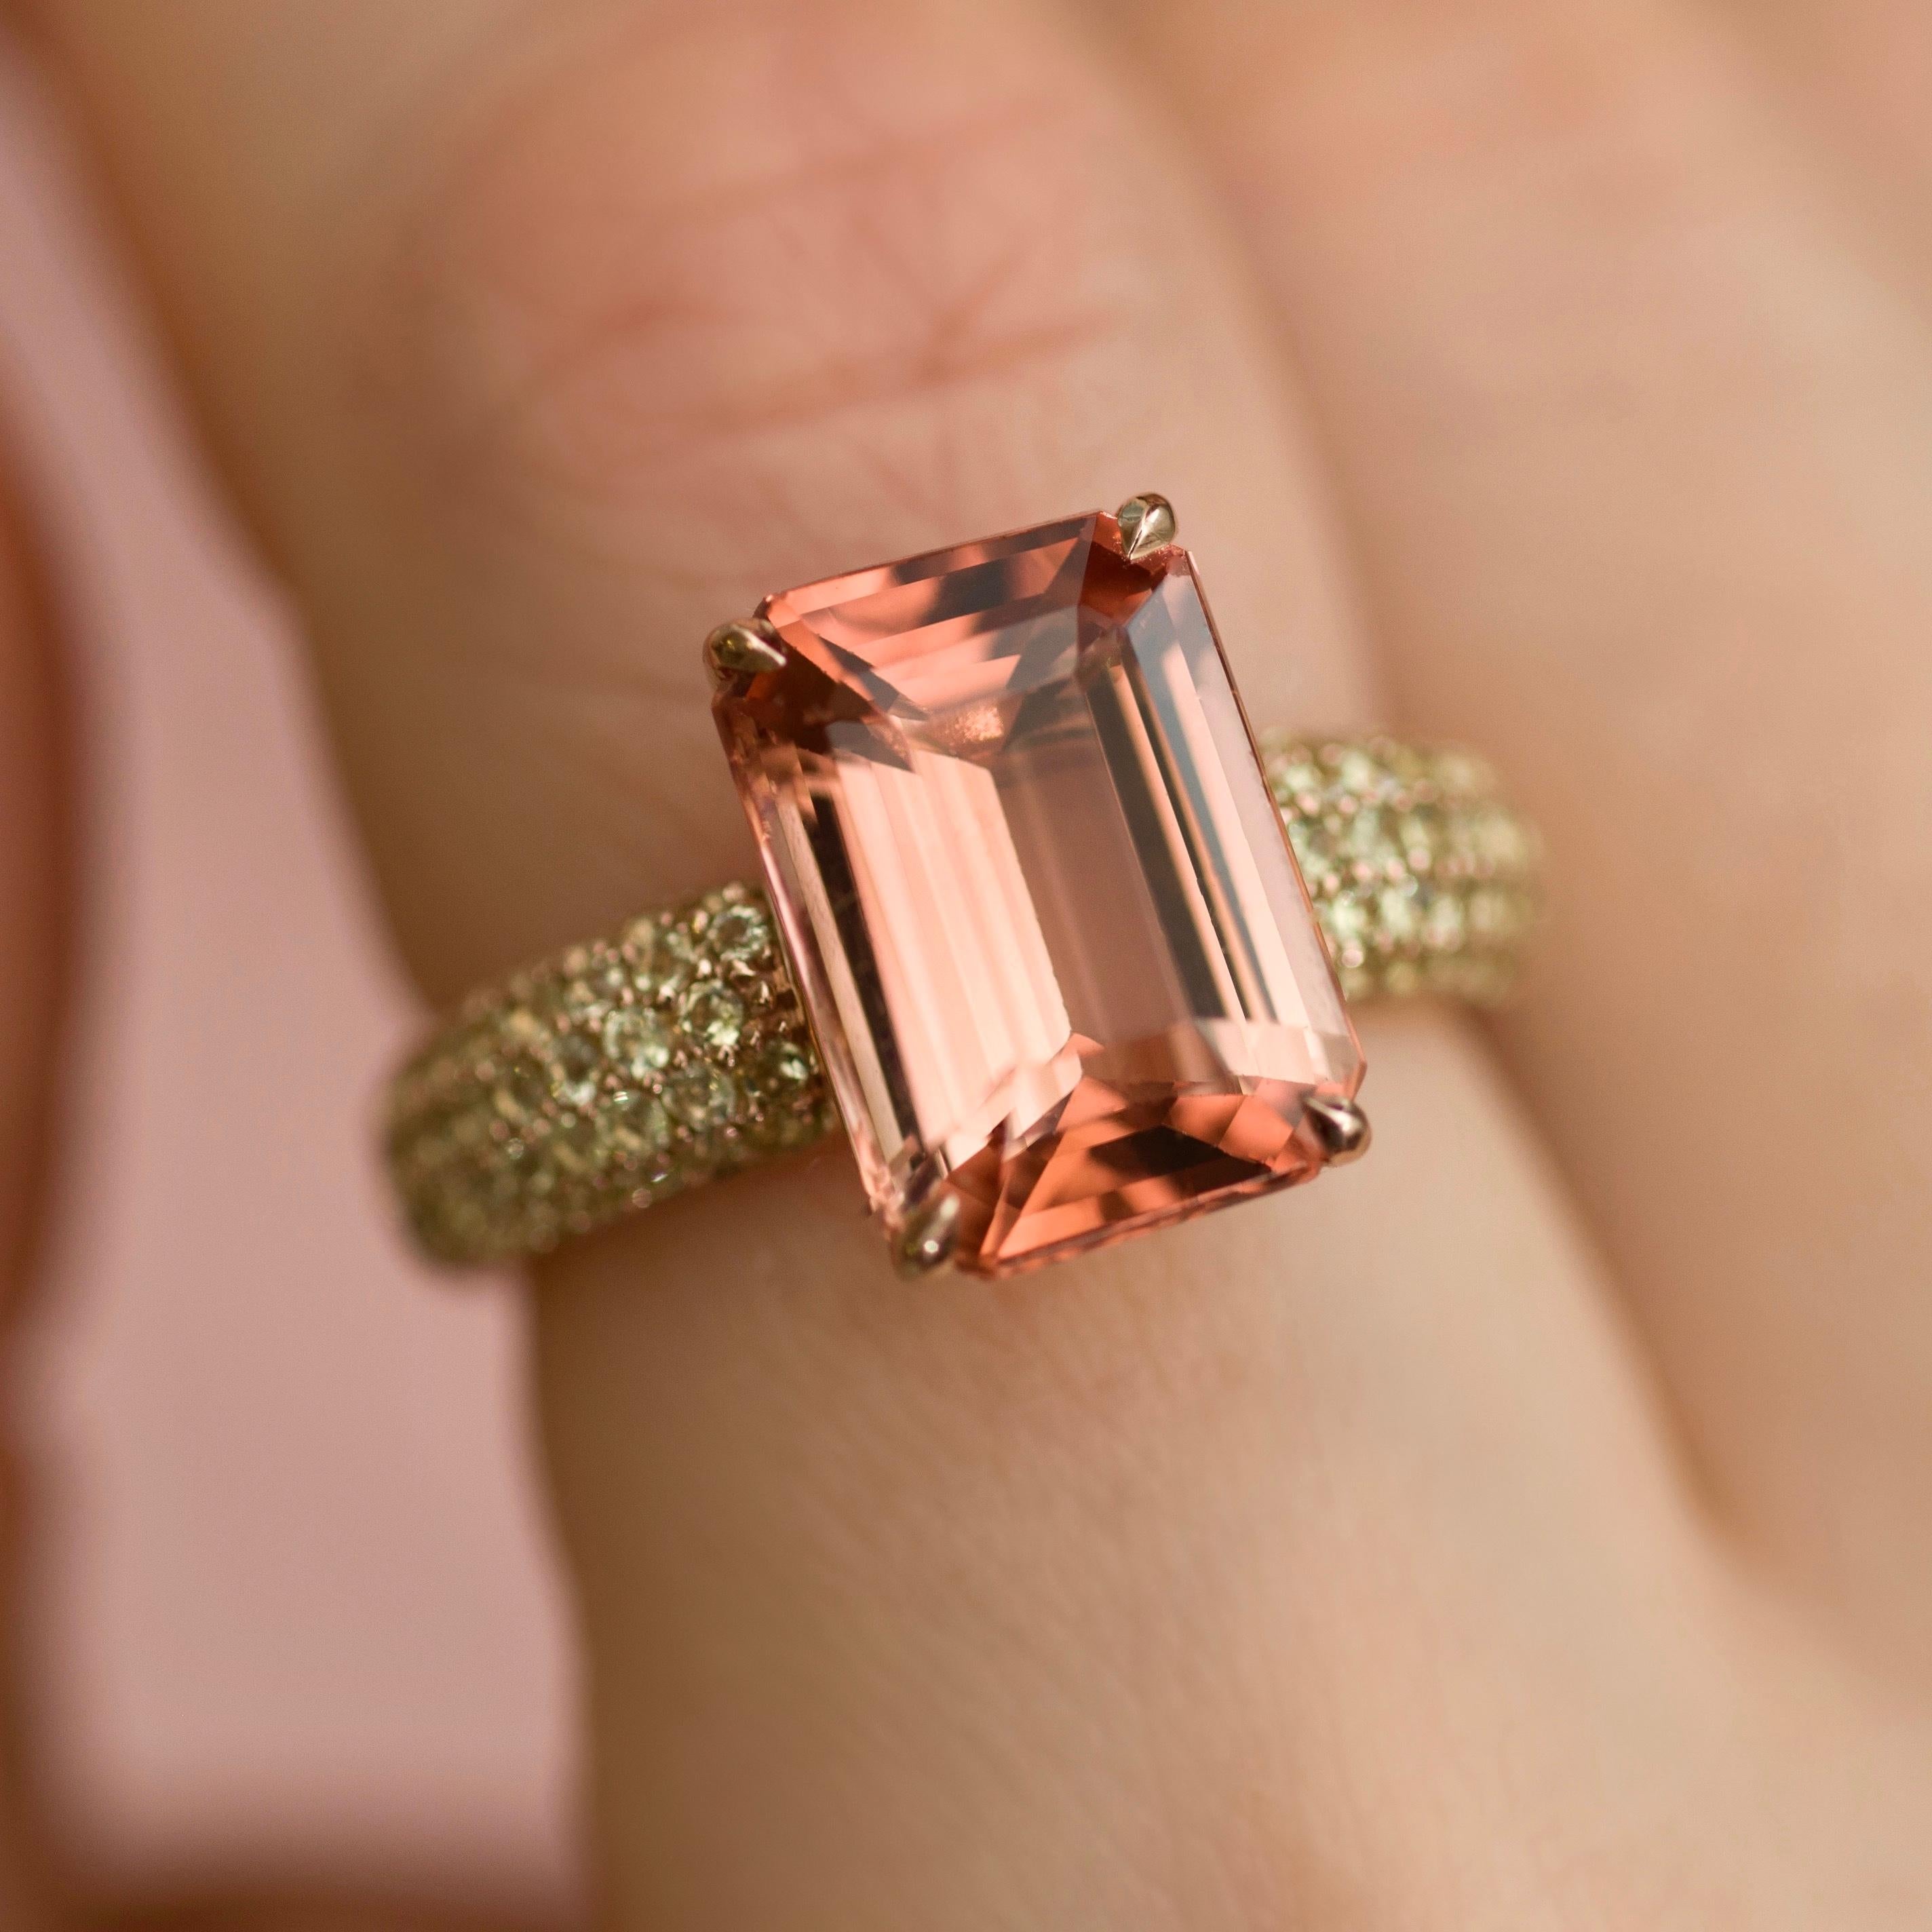 It is believed that tourmaline is a symbol of love and tenderness.
This tourmaline has very interesting color - orange-peach with some brownish overtone inside it, which is looking very attractive.
It is very common thing for tourmalines to have not